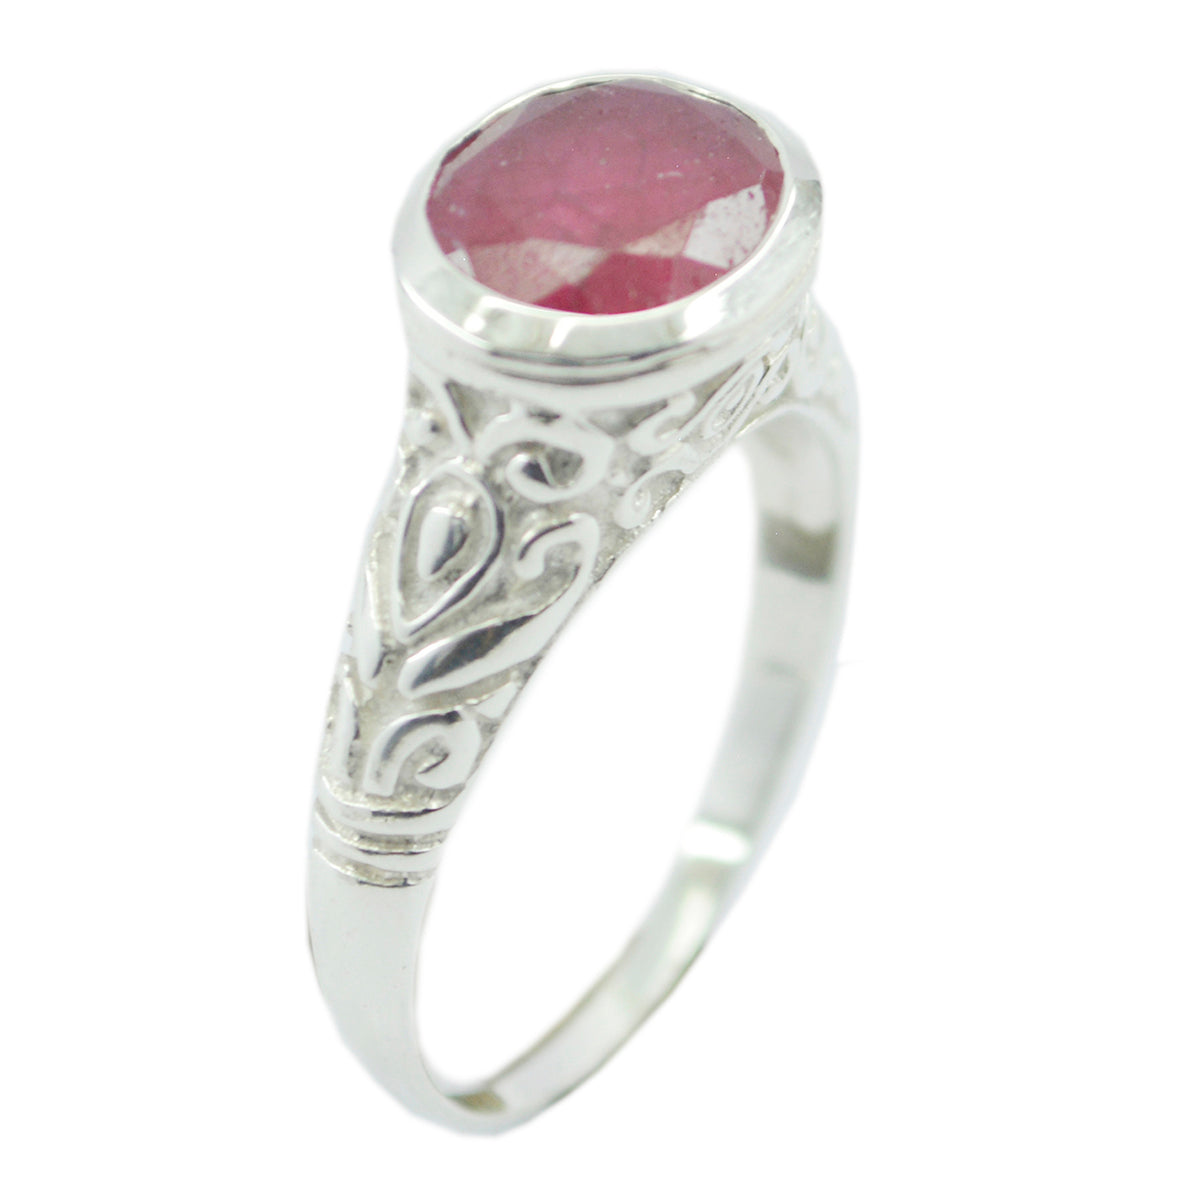 Resplendent Gem Indianruby Sterling Silver Ring Jewelry Manufacturers